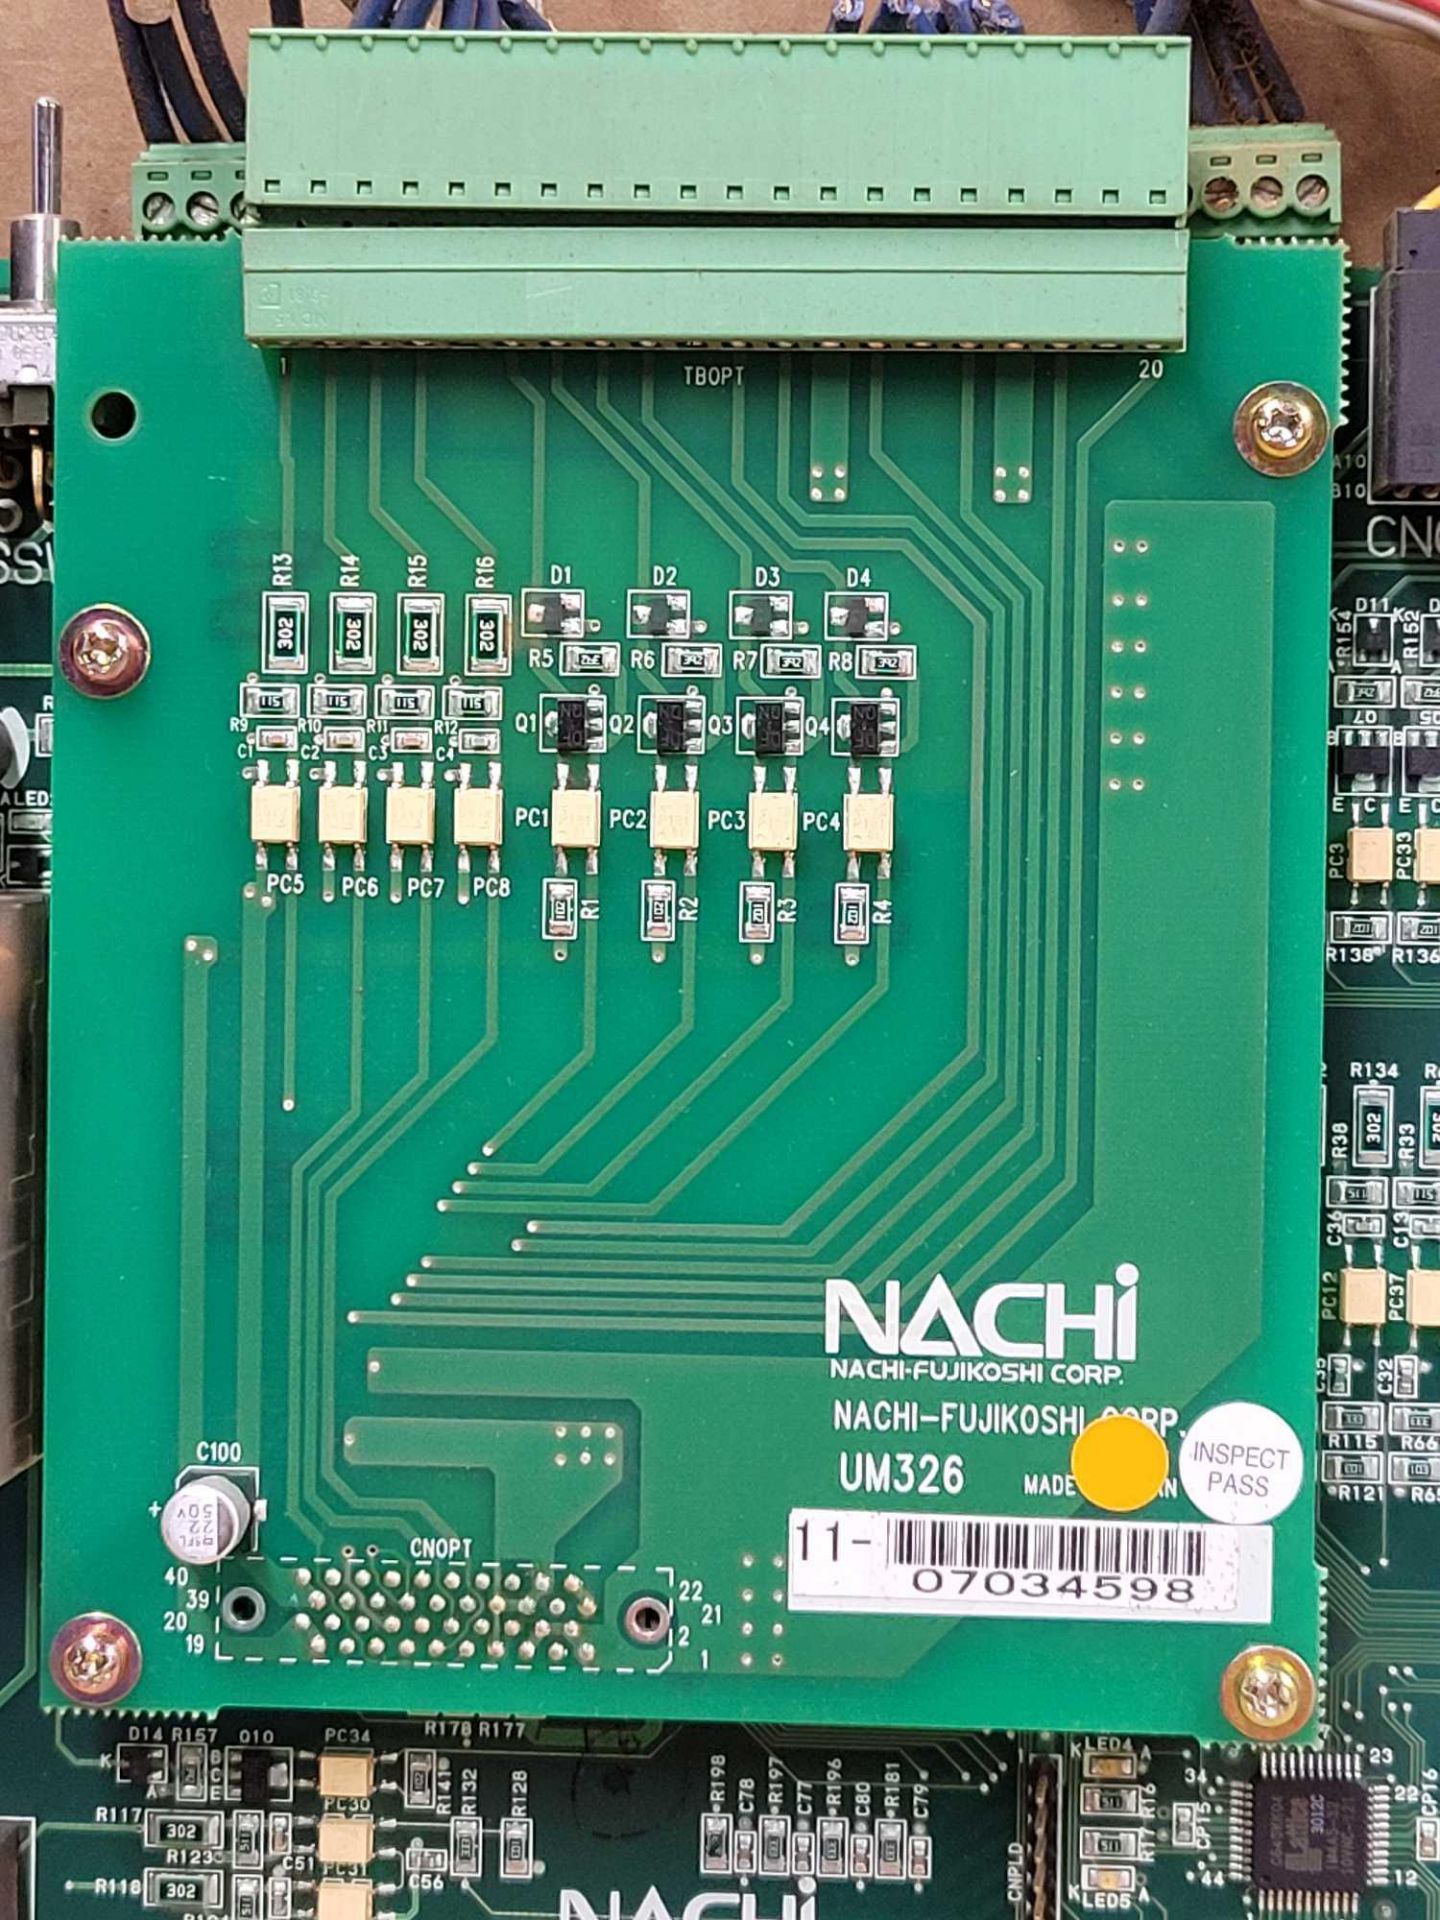 NACHI UM301C with UM326 / PCB Board Card / Lot Weight: 1.2 lbs - Image 2 of 7